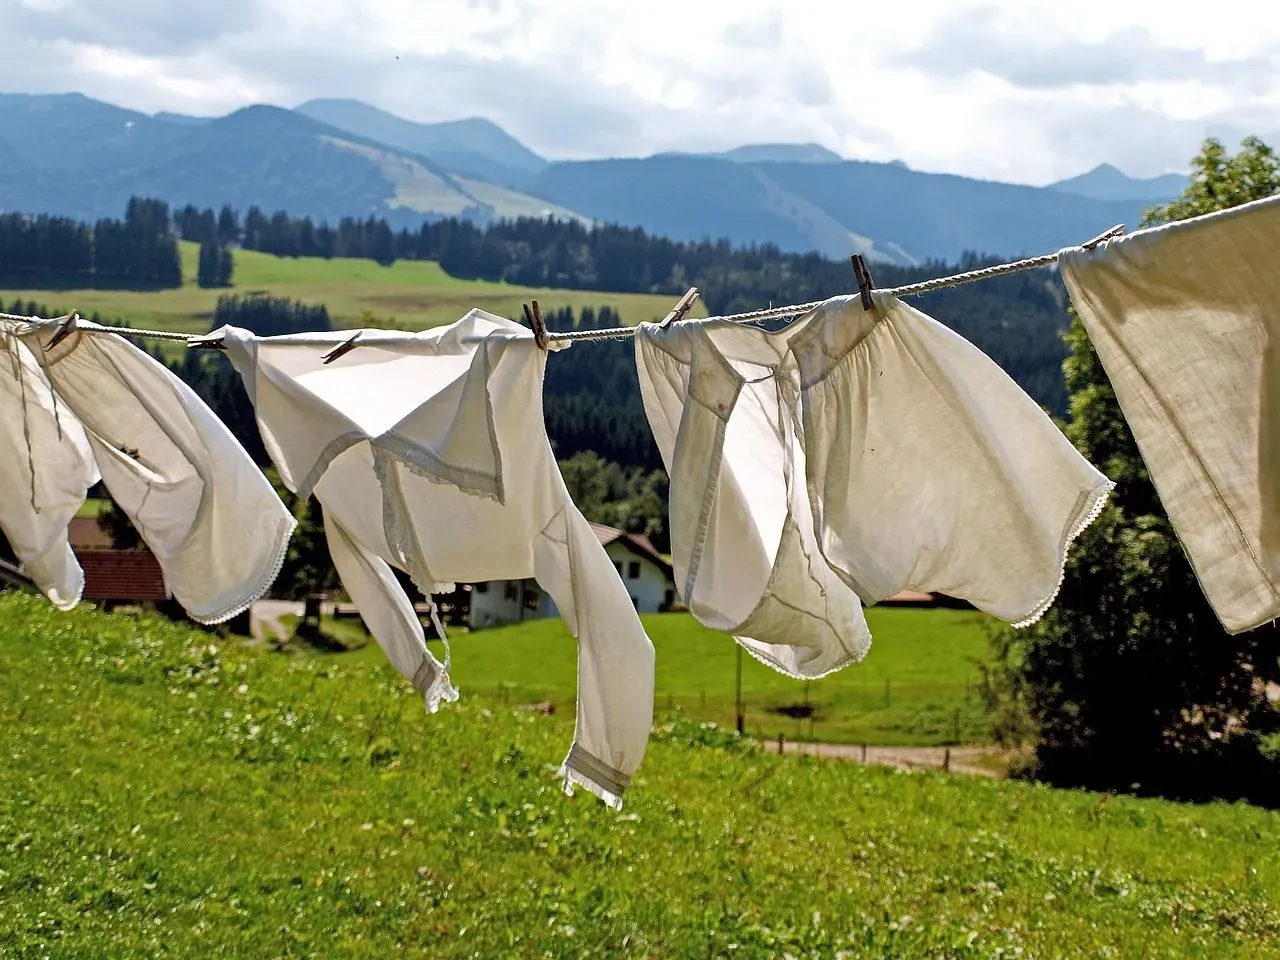 Why do my clothes smell after washing? There are plenty of ways to make laundry smell better.